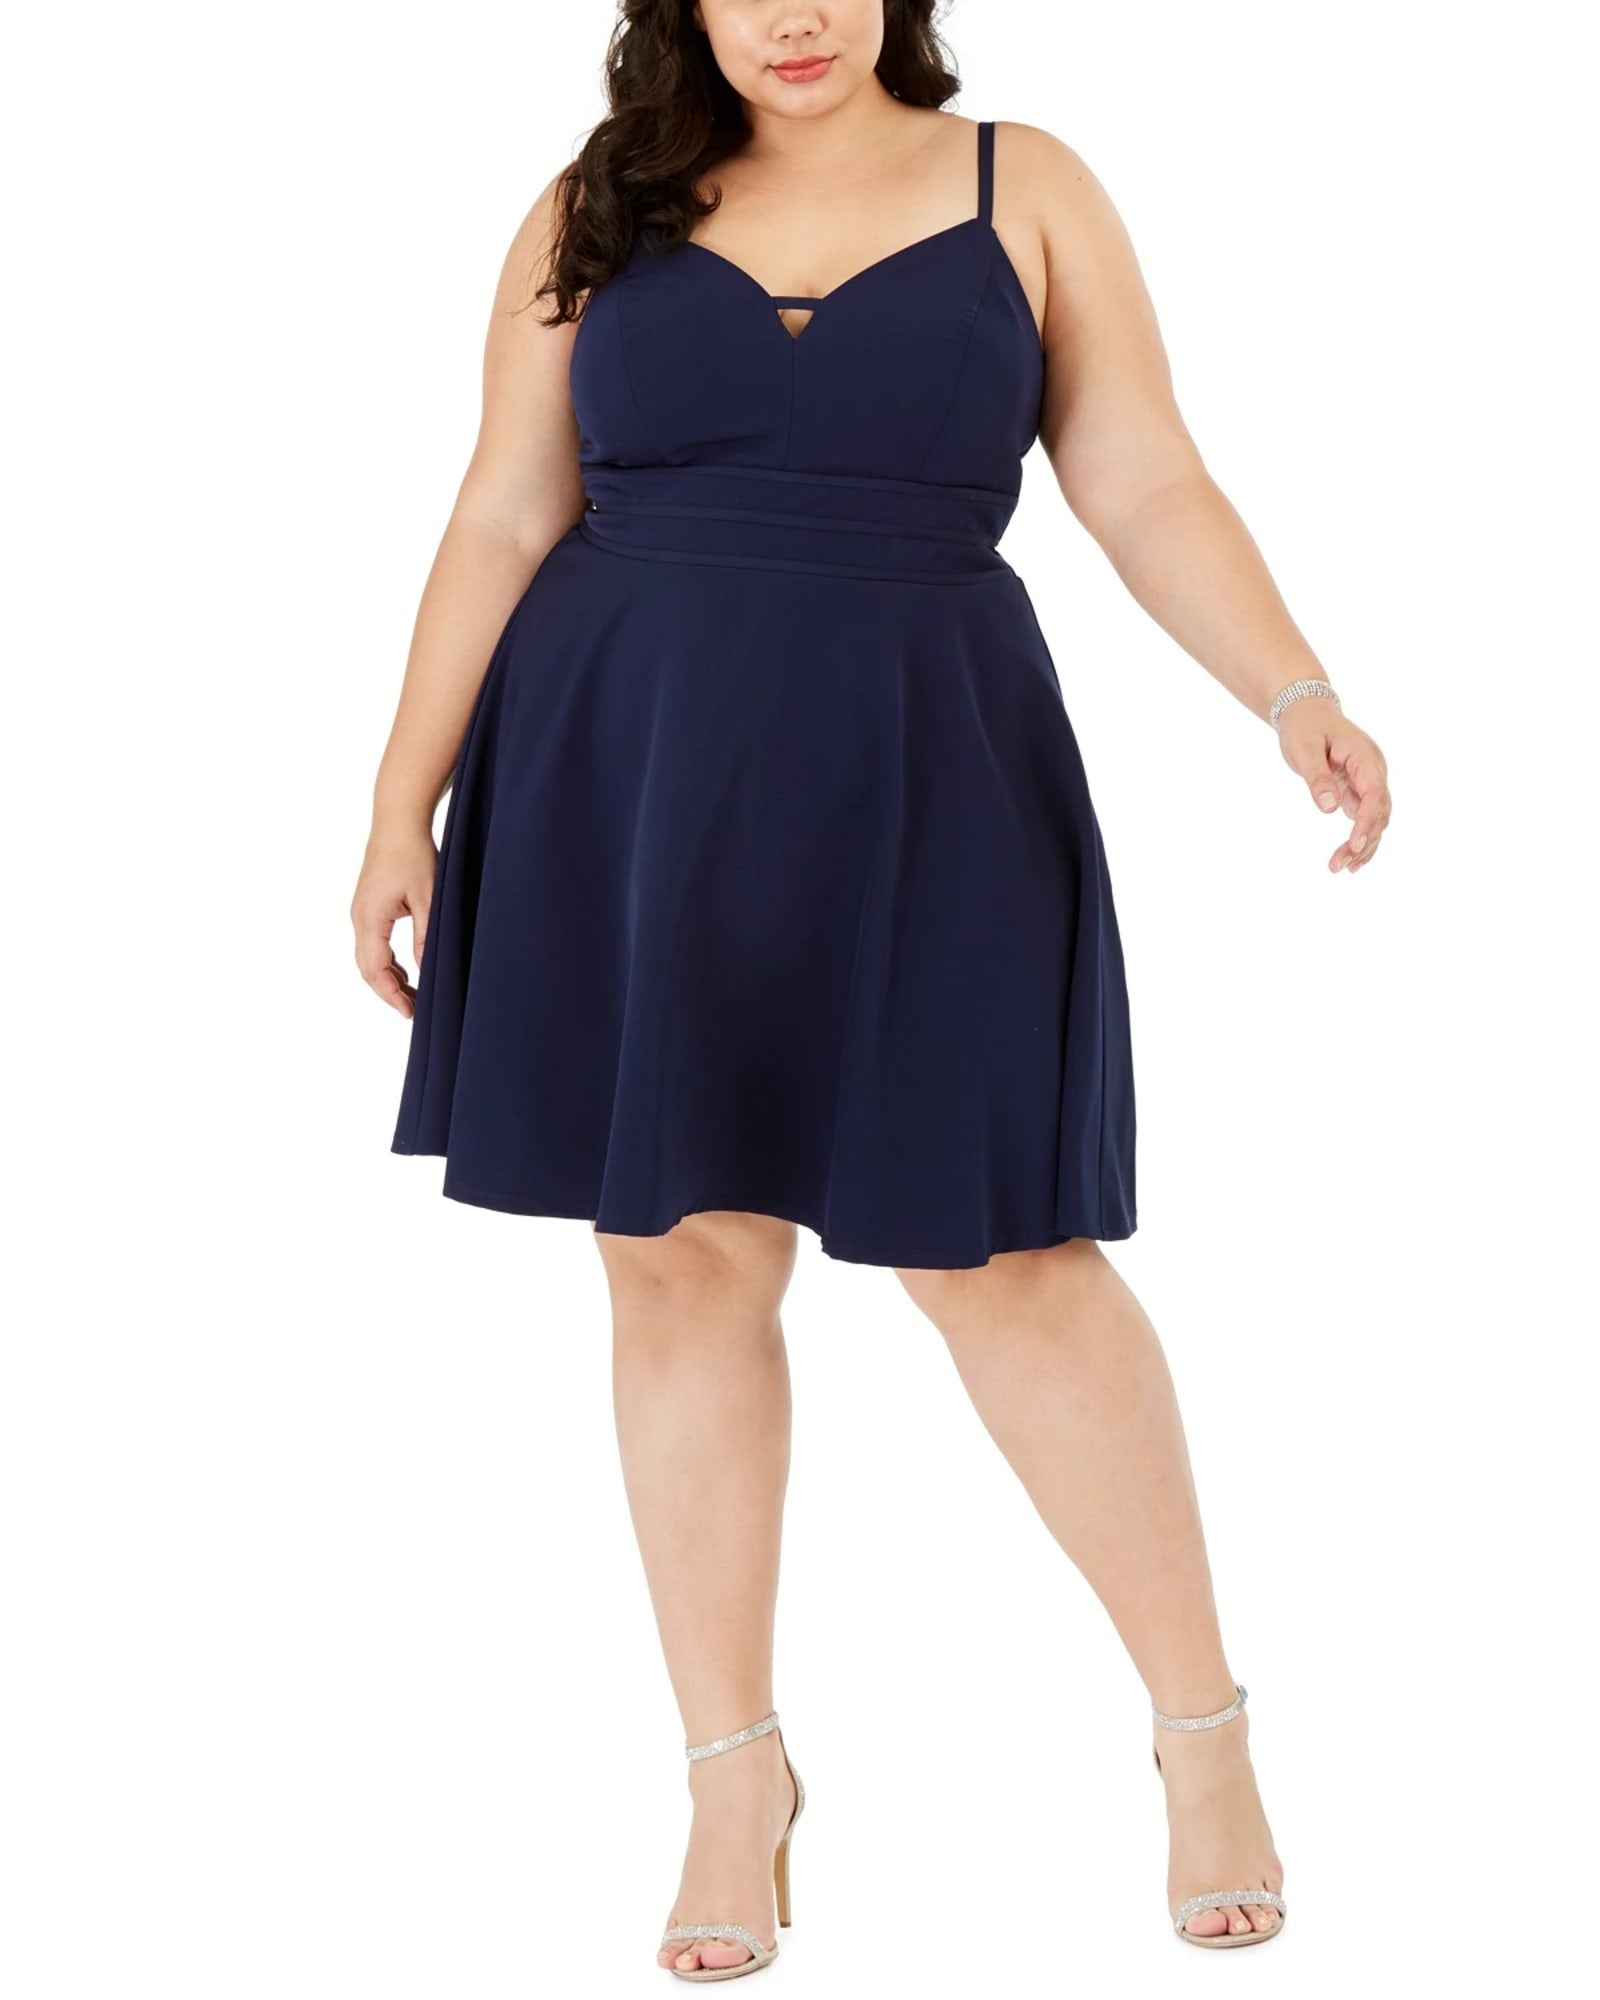 Date Night Outfits - Date Night Dresses, Tops & Plus Size - Matalan